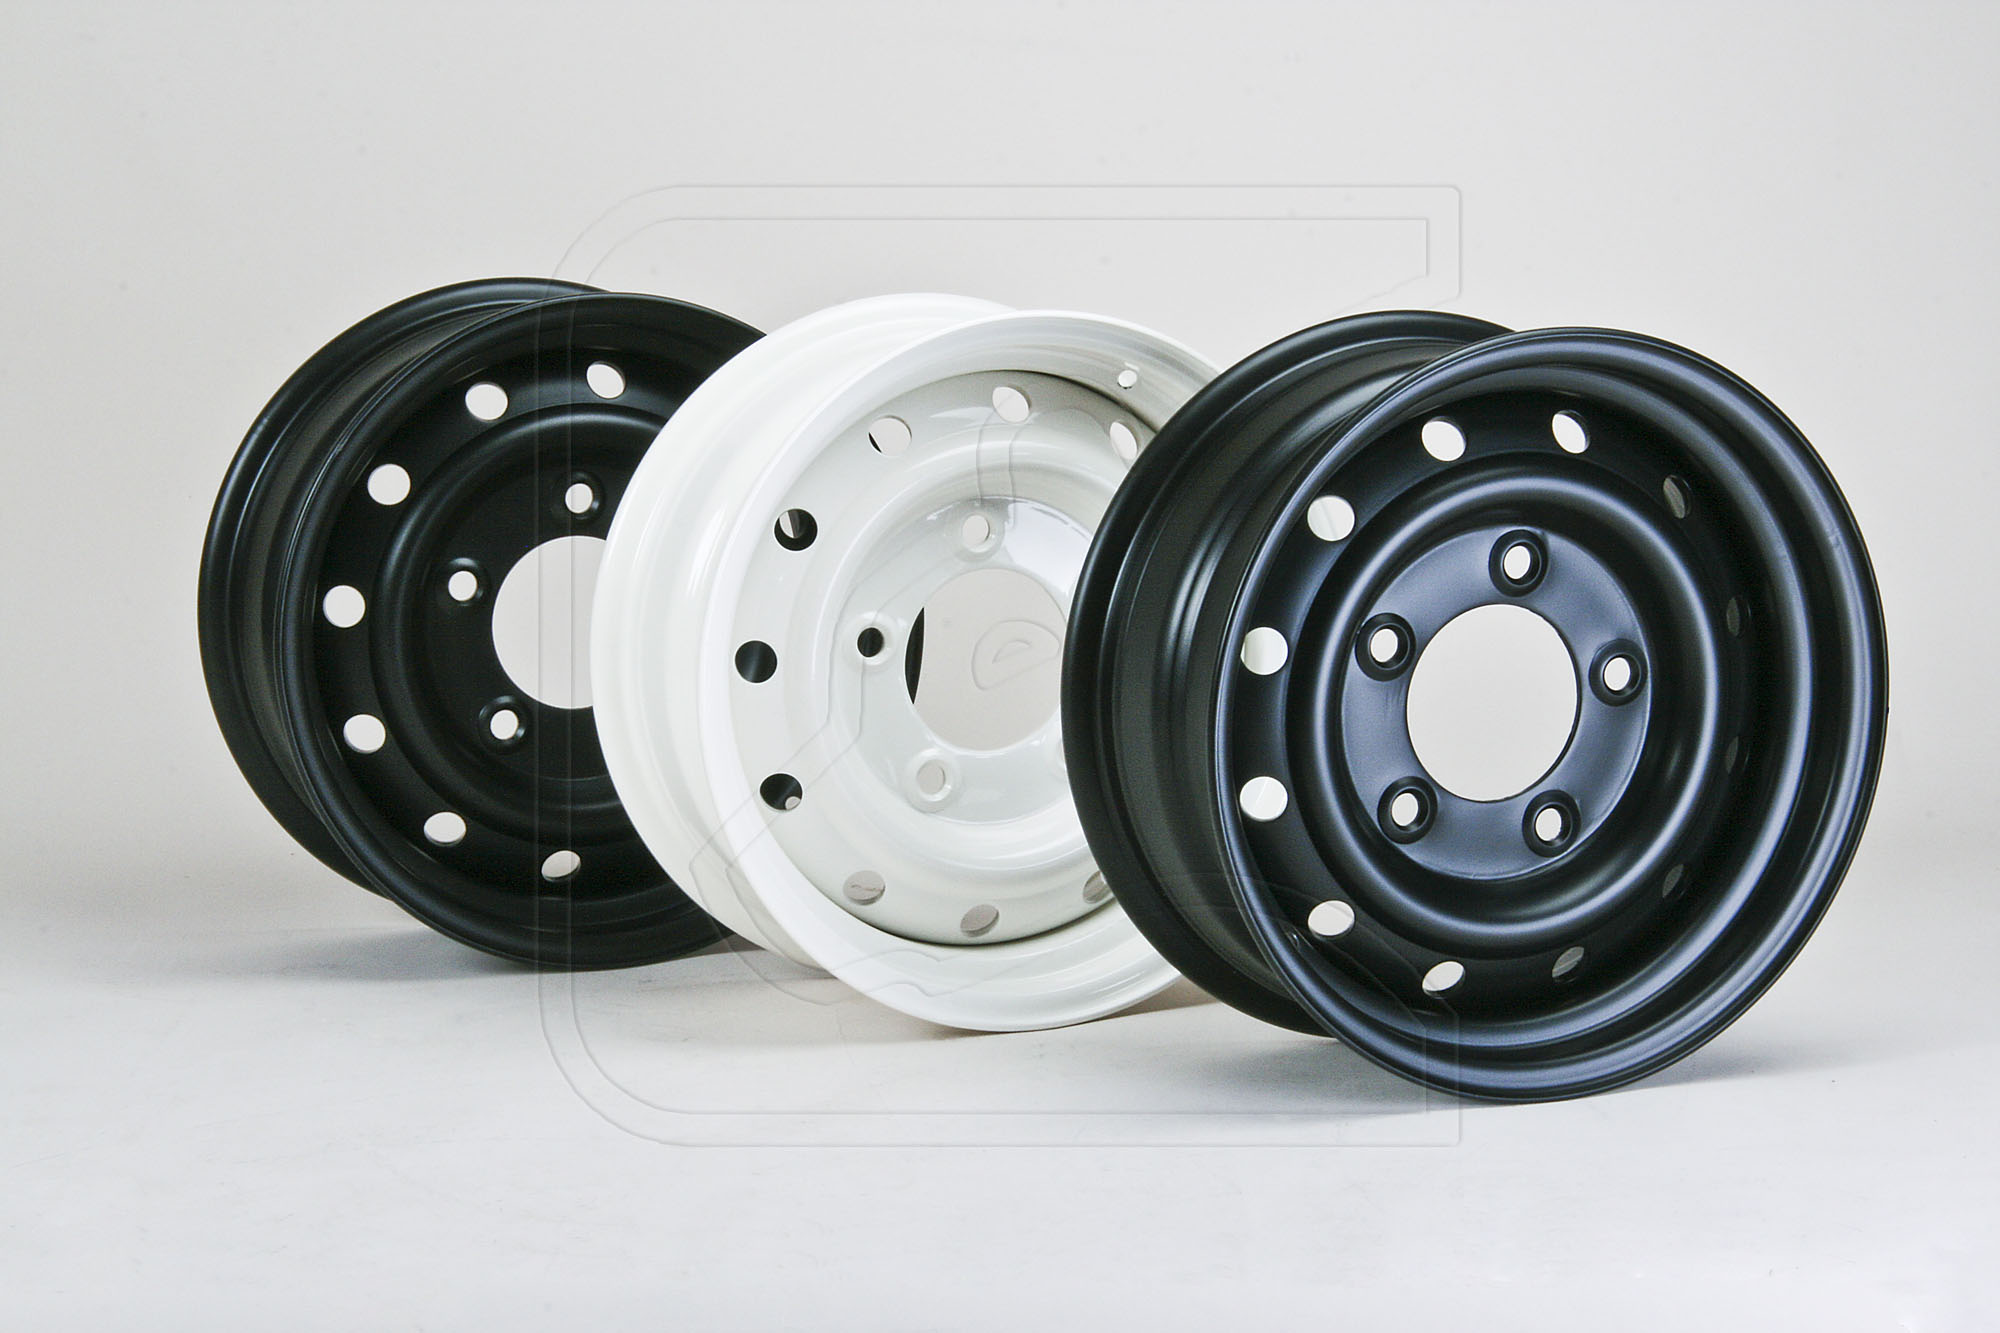 Lr Wolf Steel Wheel 6 5x16 Shop Now Nakatanenga 4x4 Equipment For Land Rover Offroad Outdoor